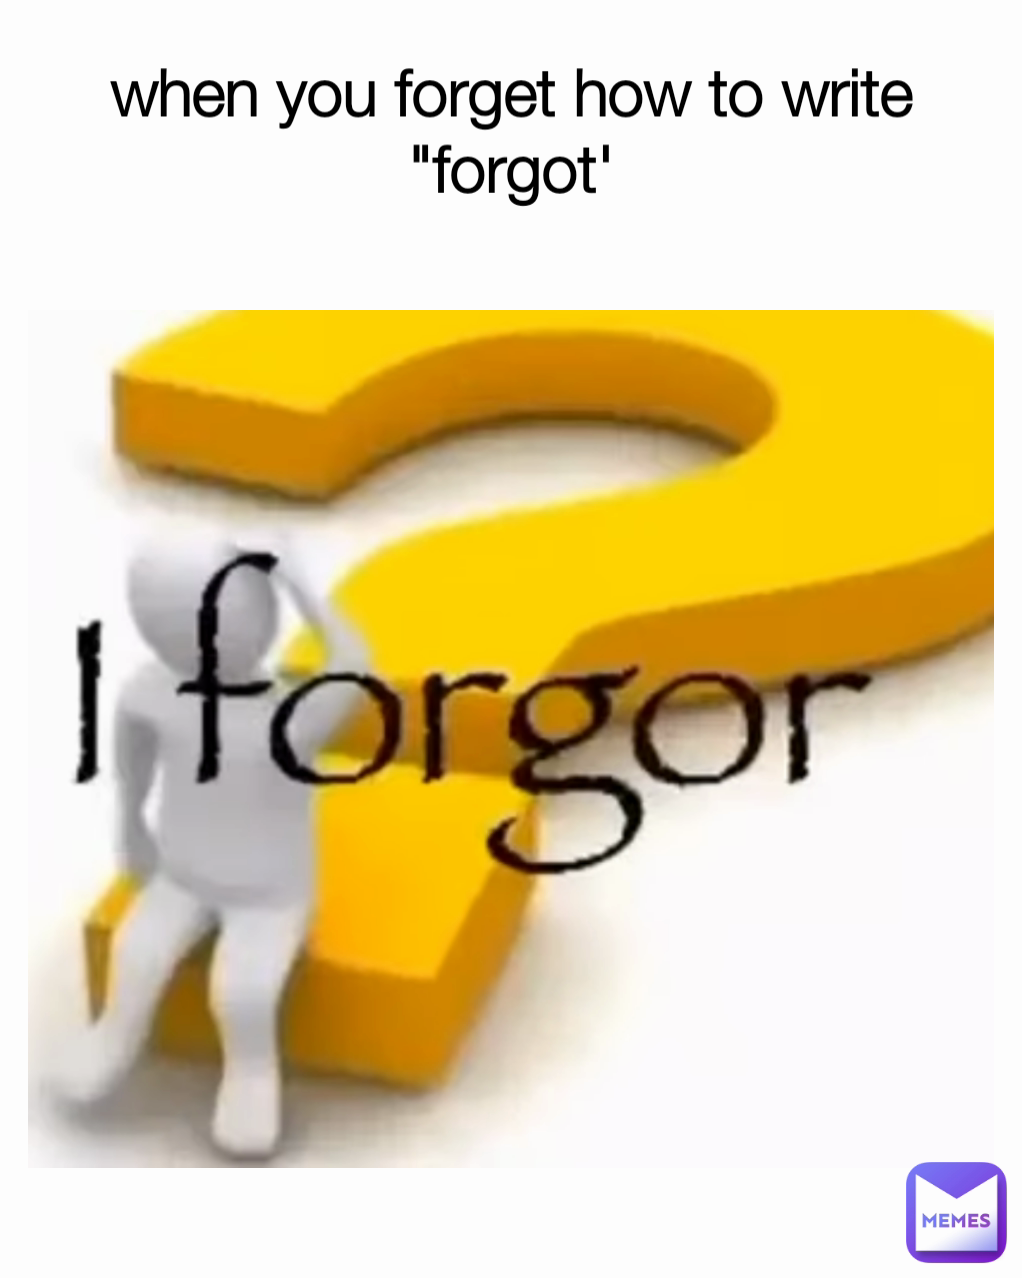 when you forget how to write "forgot'